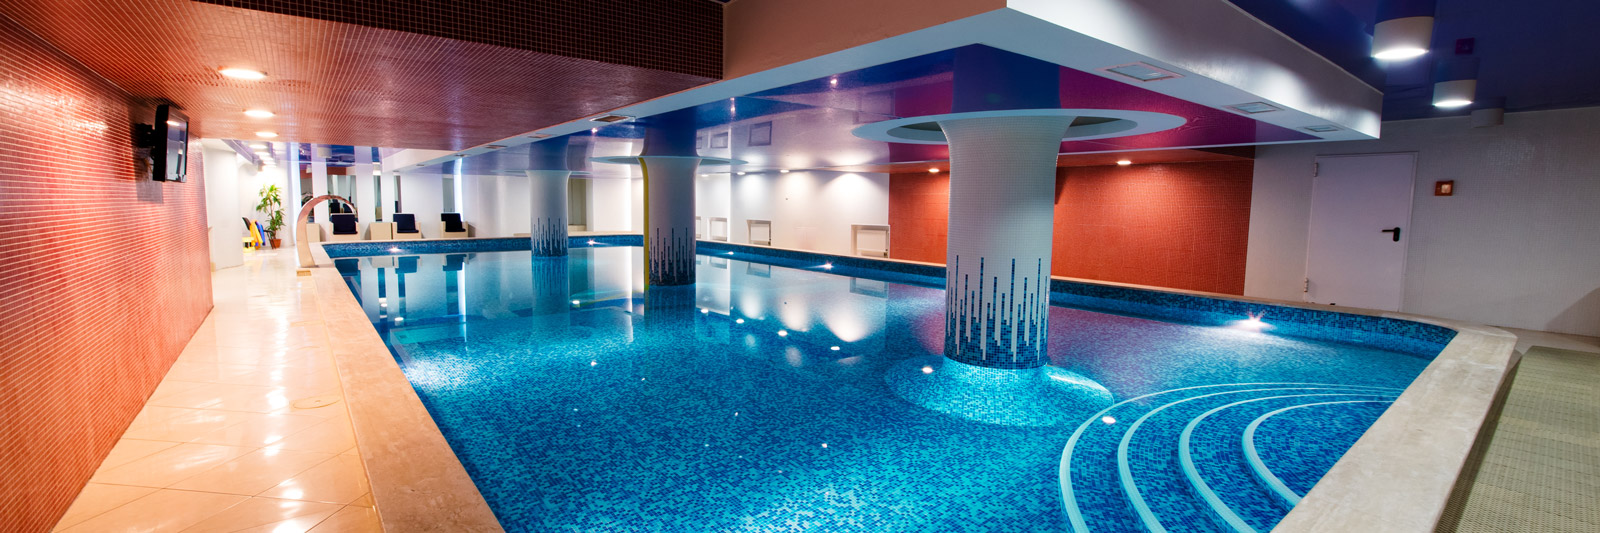 image of an indoor swimming pool